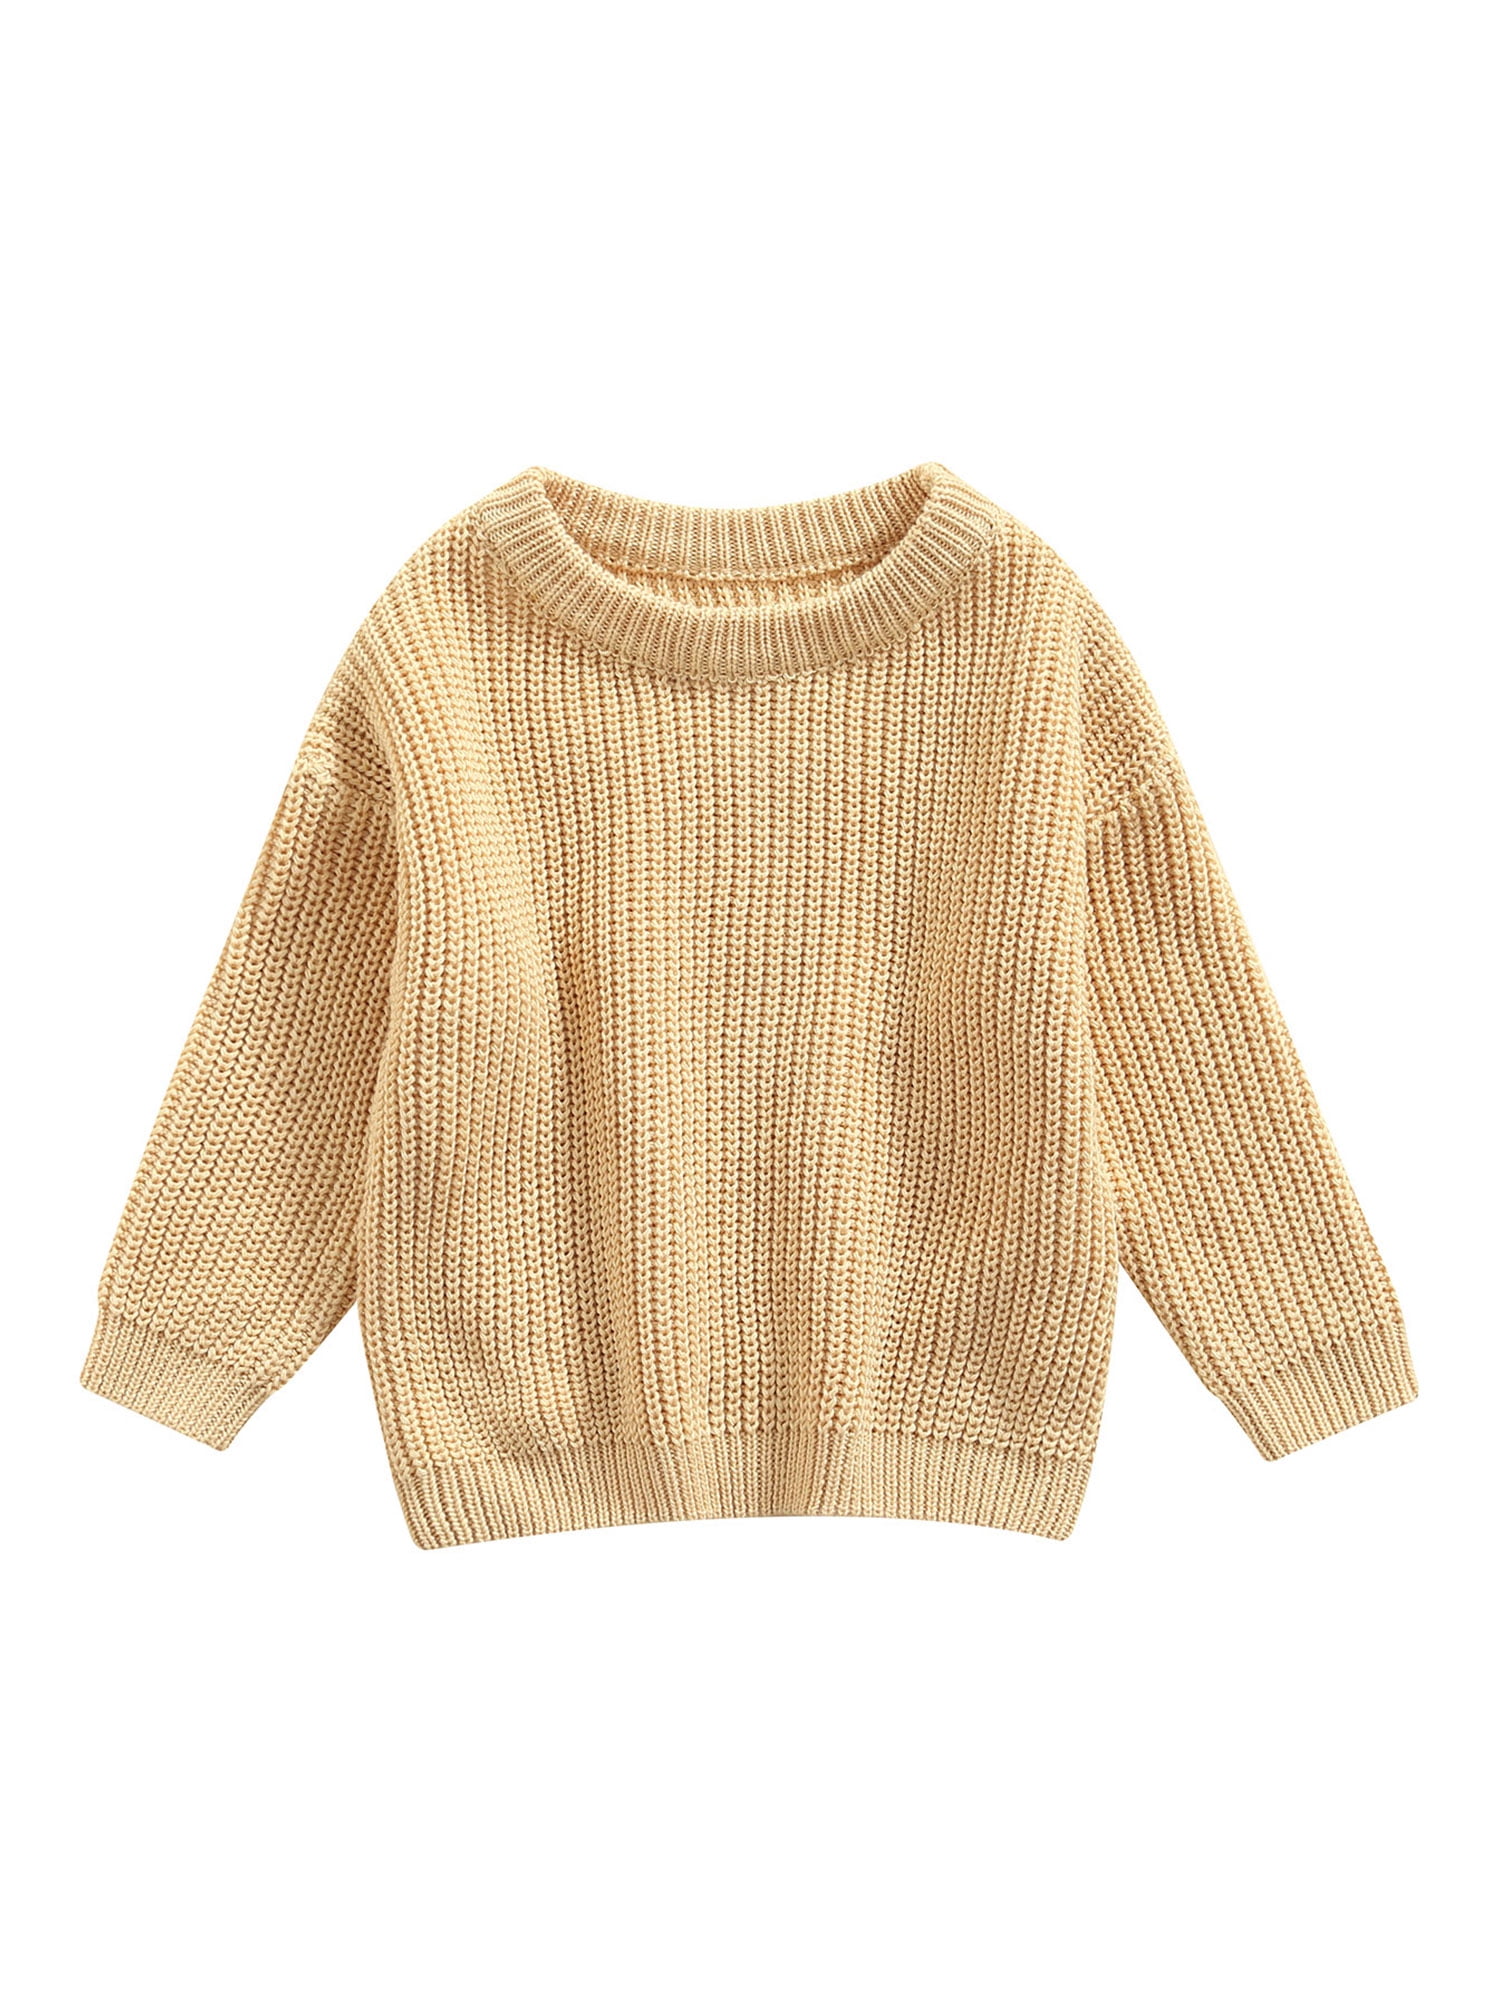 Infant Toddler Baby Girl Boy Knit Sweater Long Sleeve Blouse Solid Pullover Sweatshirt Warm Crewneck Tops